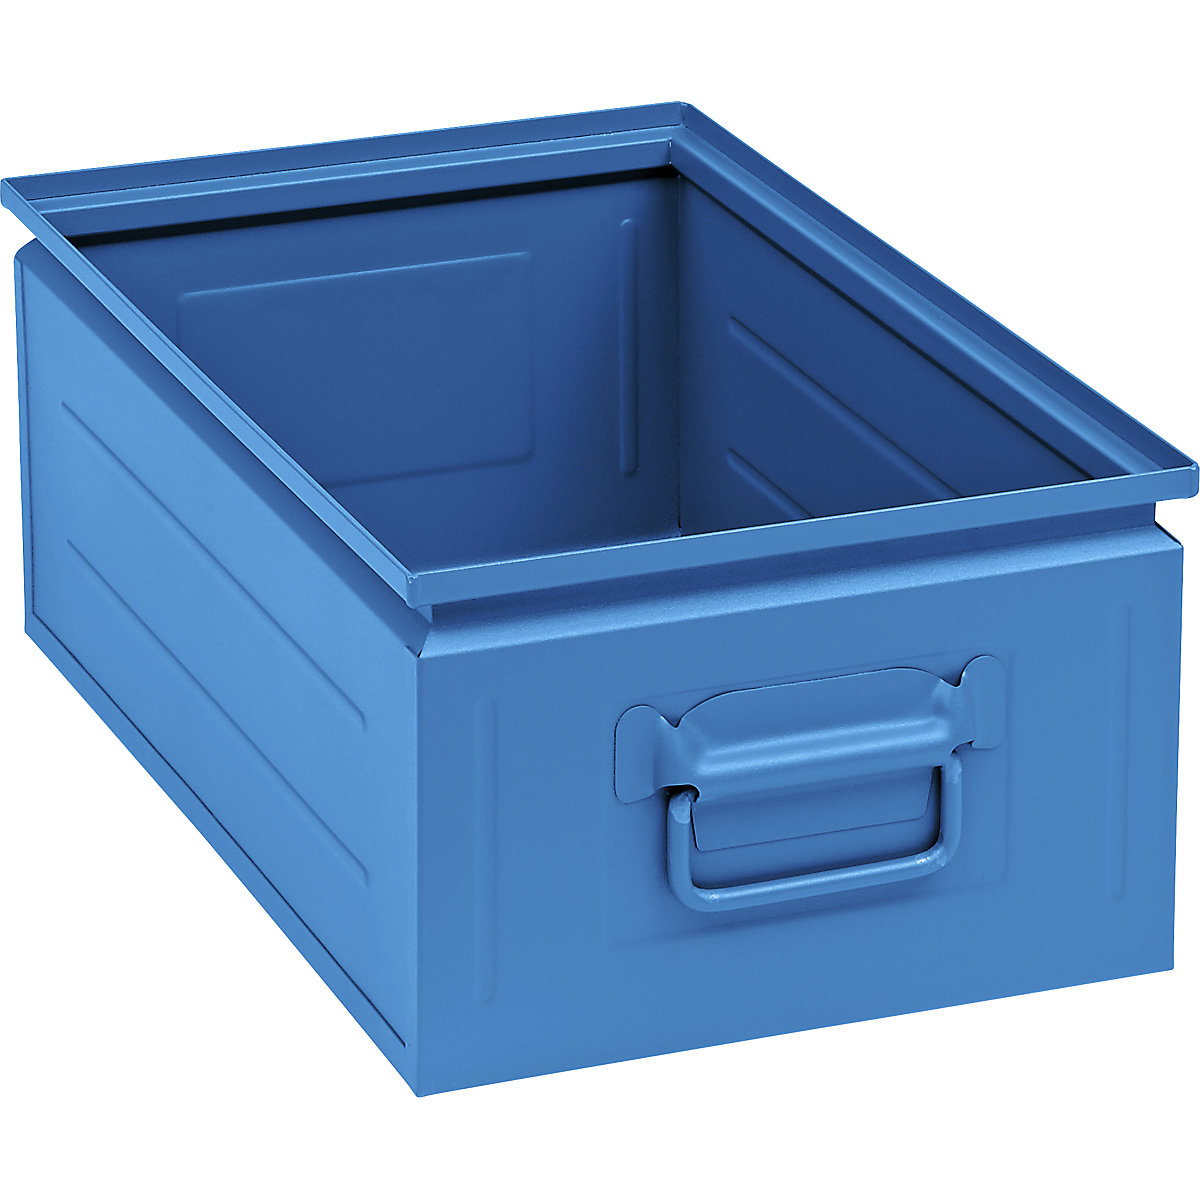 Stacking container made of sheet steel, capacity approx. 30 l, light blue RAL 5012